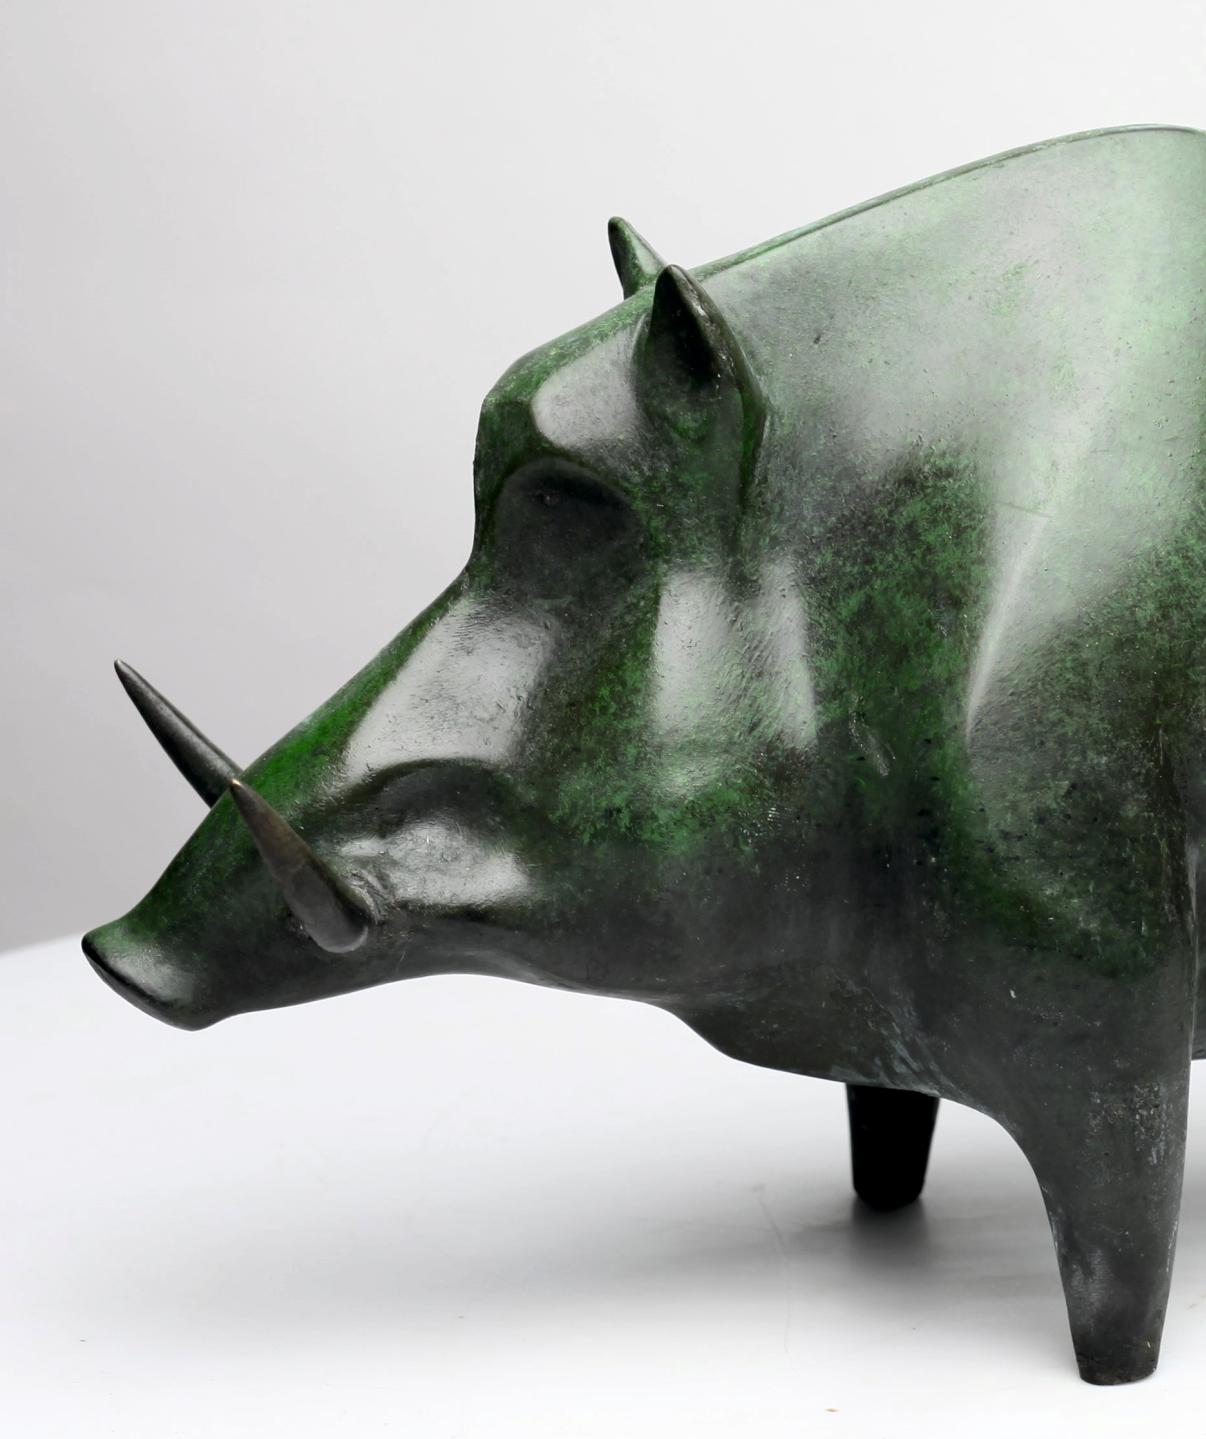 Boar, patinated bronze, 19.5 x 32 x 12 cm, on the bottom the author's logo and a numerical description.
Weight: 4.35 kg, edition 3 of 8, 2022.

Mariusz Dydo was born in 1979. After graduating from the 